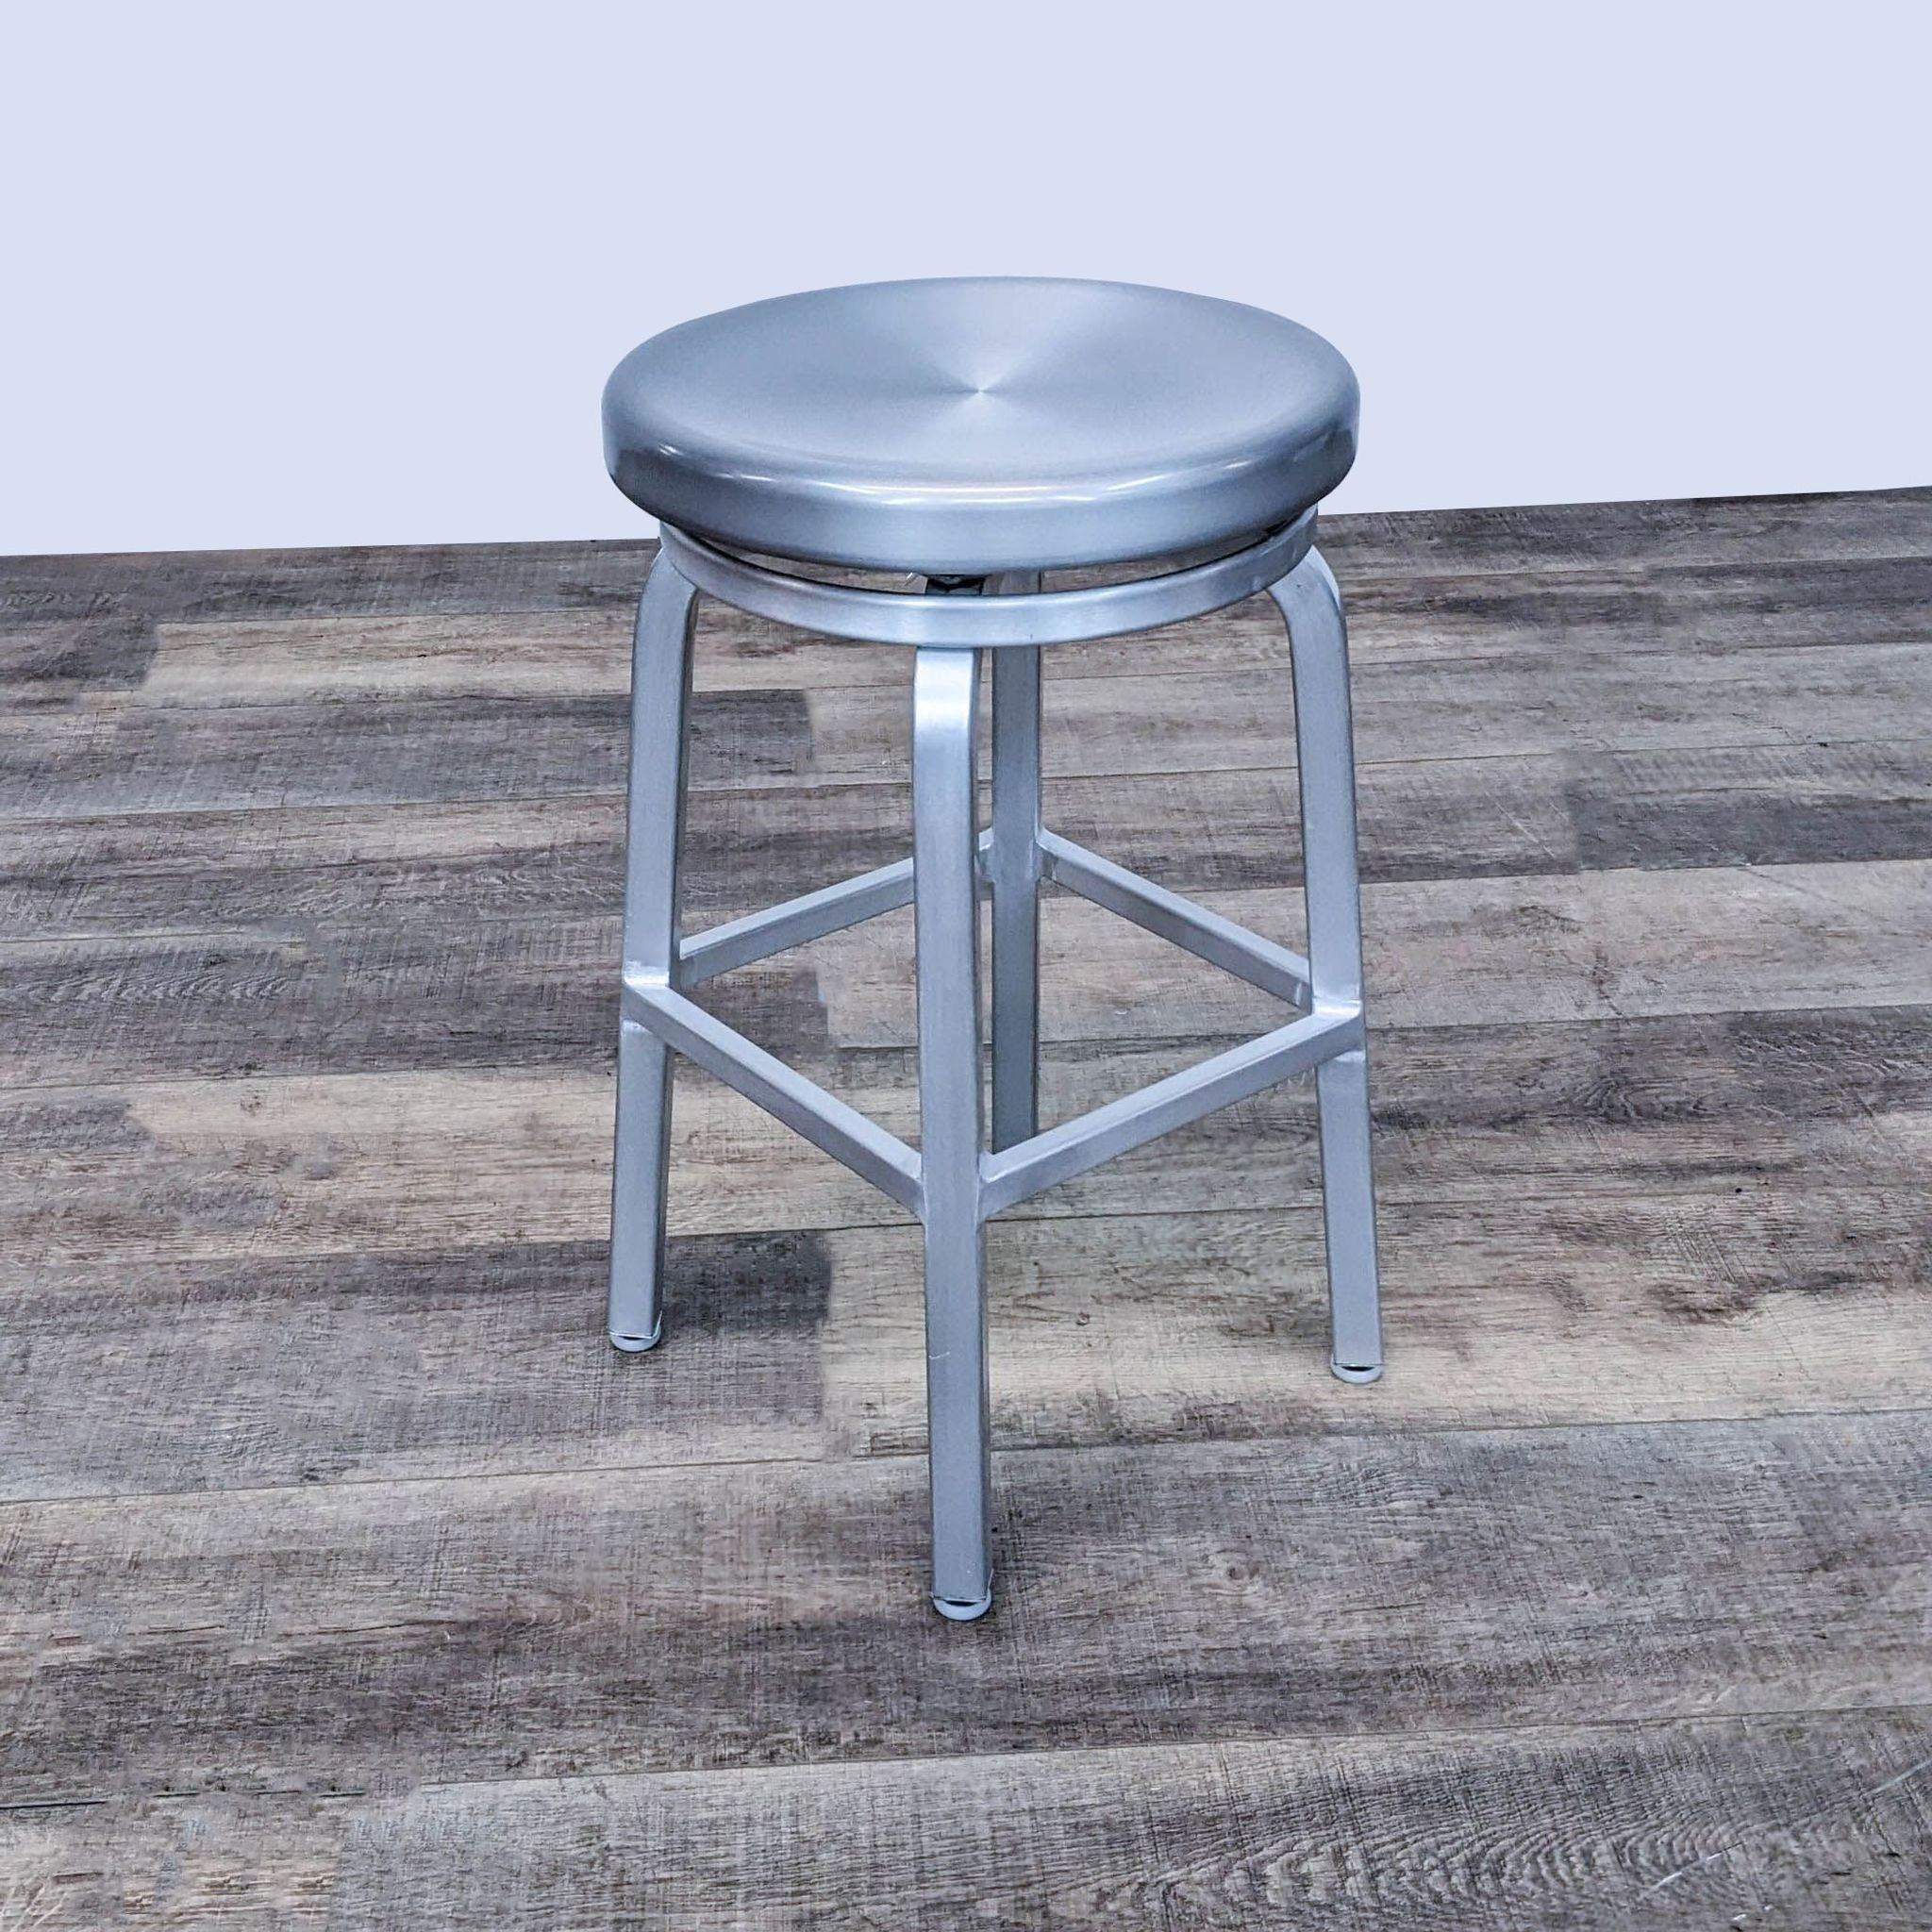 Reperch industrial-style metal stool with a swivel seat on a wooden floor.